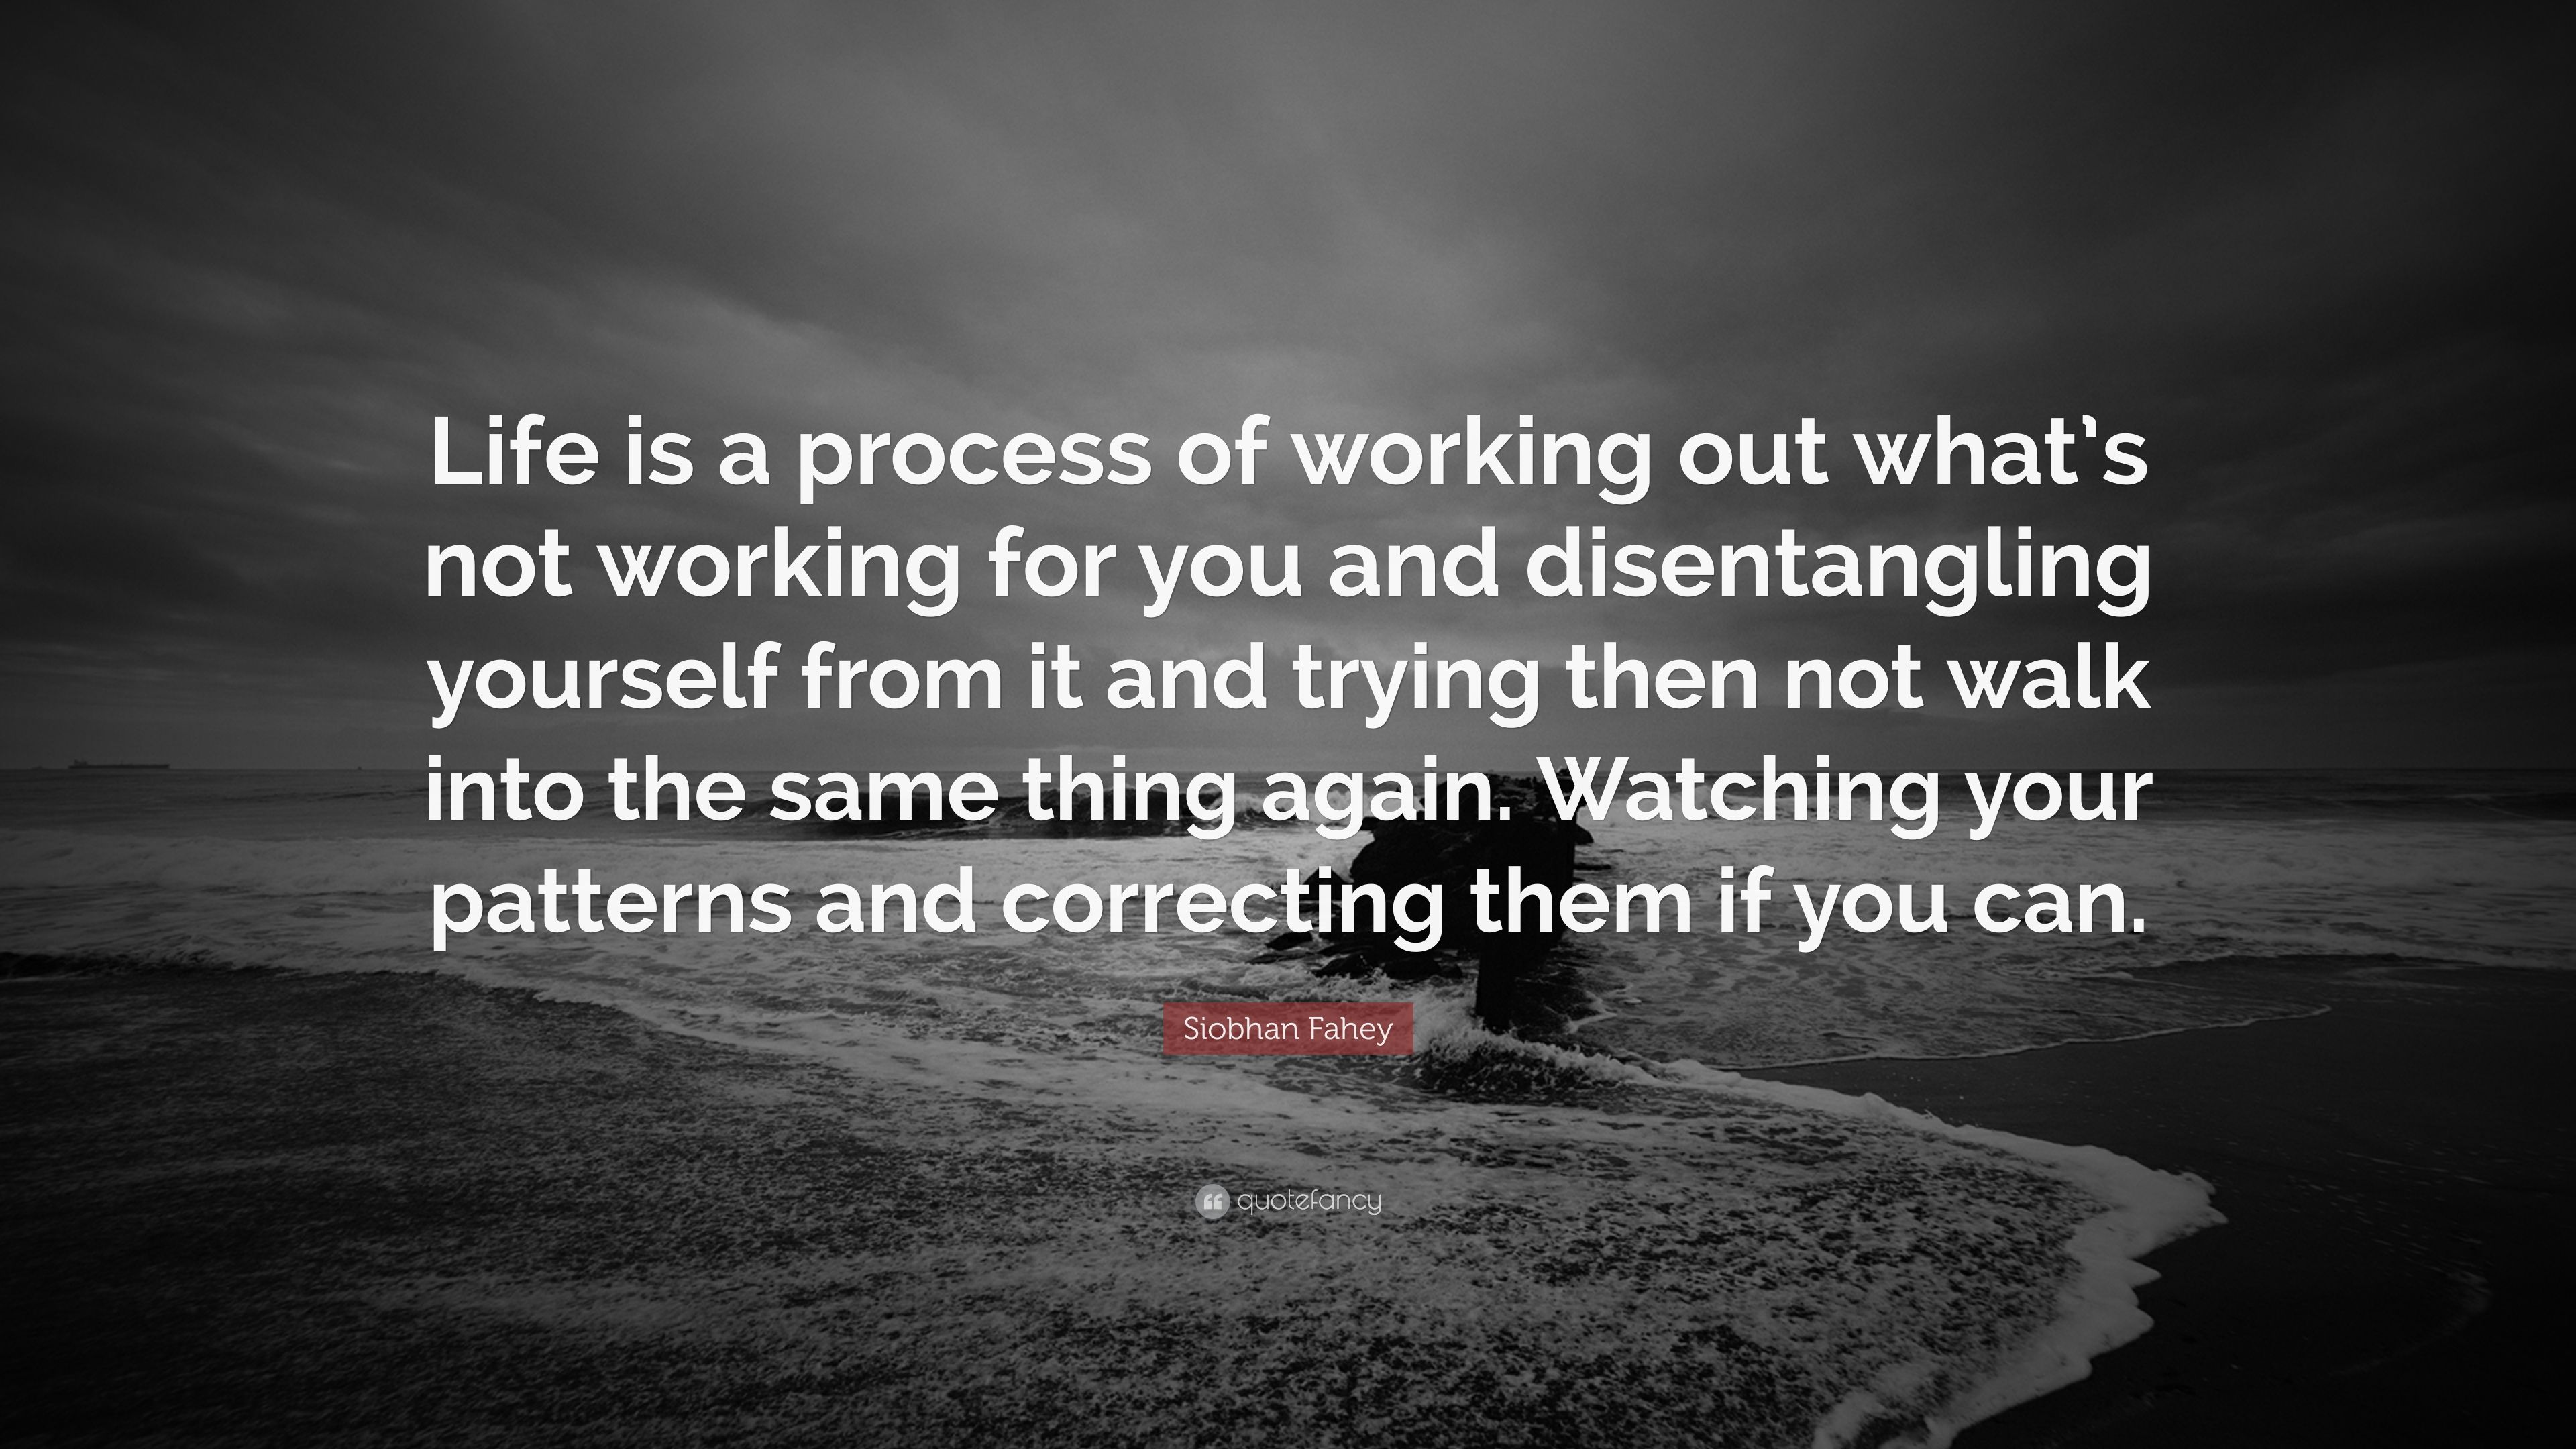 Siobhan Fahey Quote: “Life is a process of working out what's not working for you and disentangling yourself from it and trying then not walk .” (7 wallpaper)